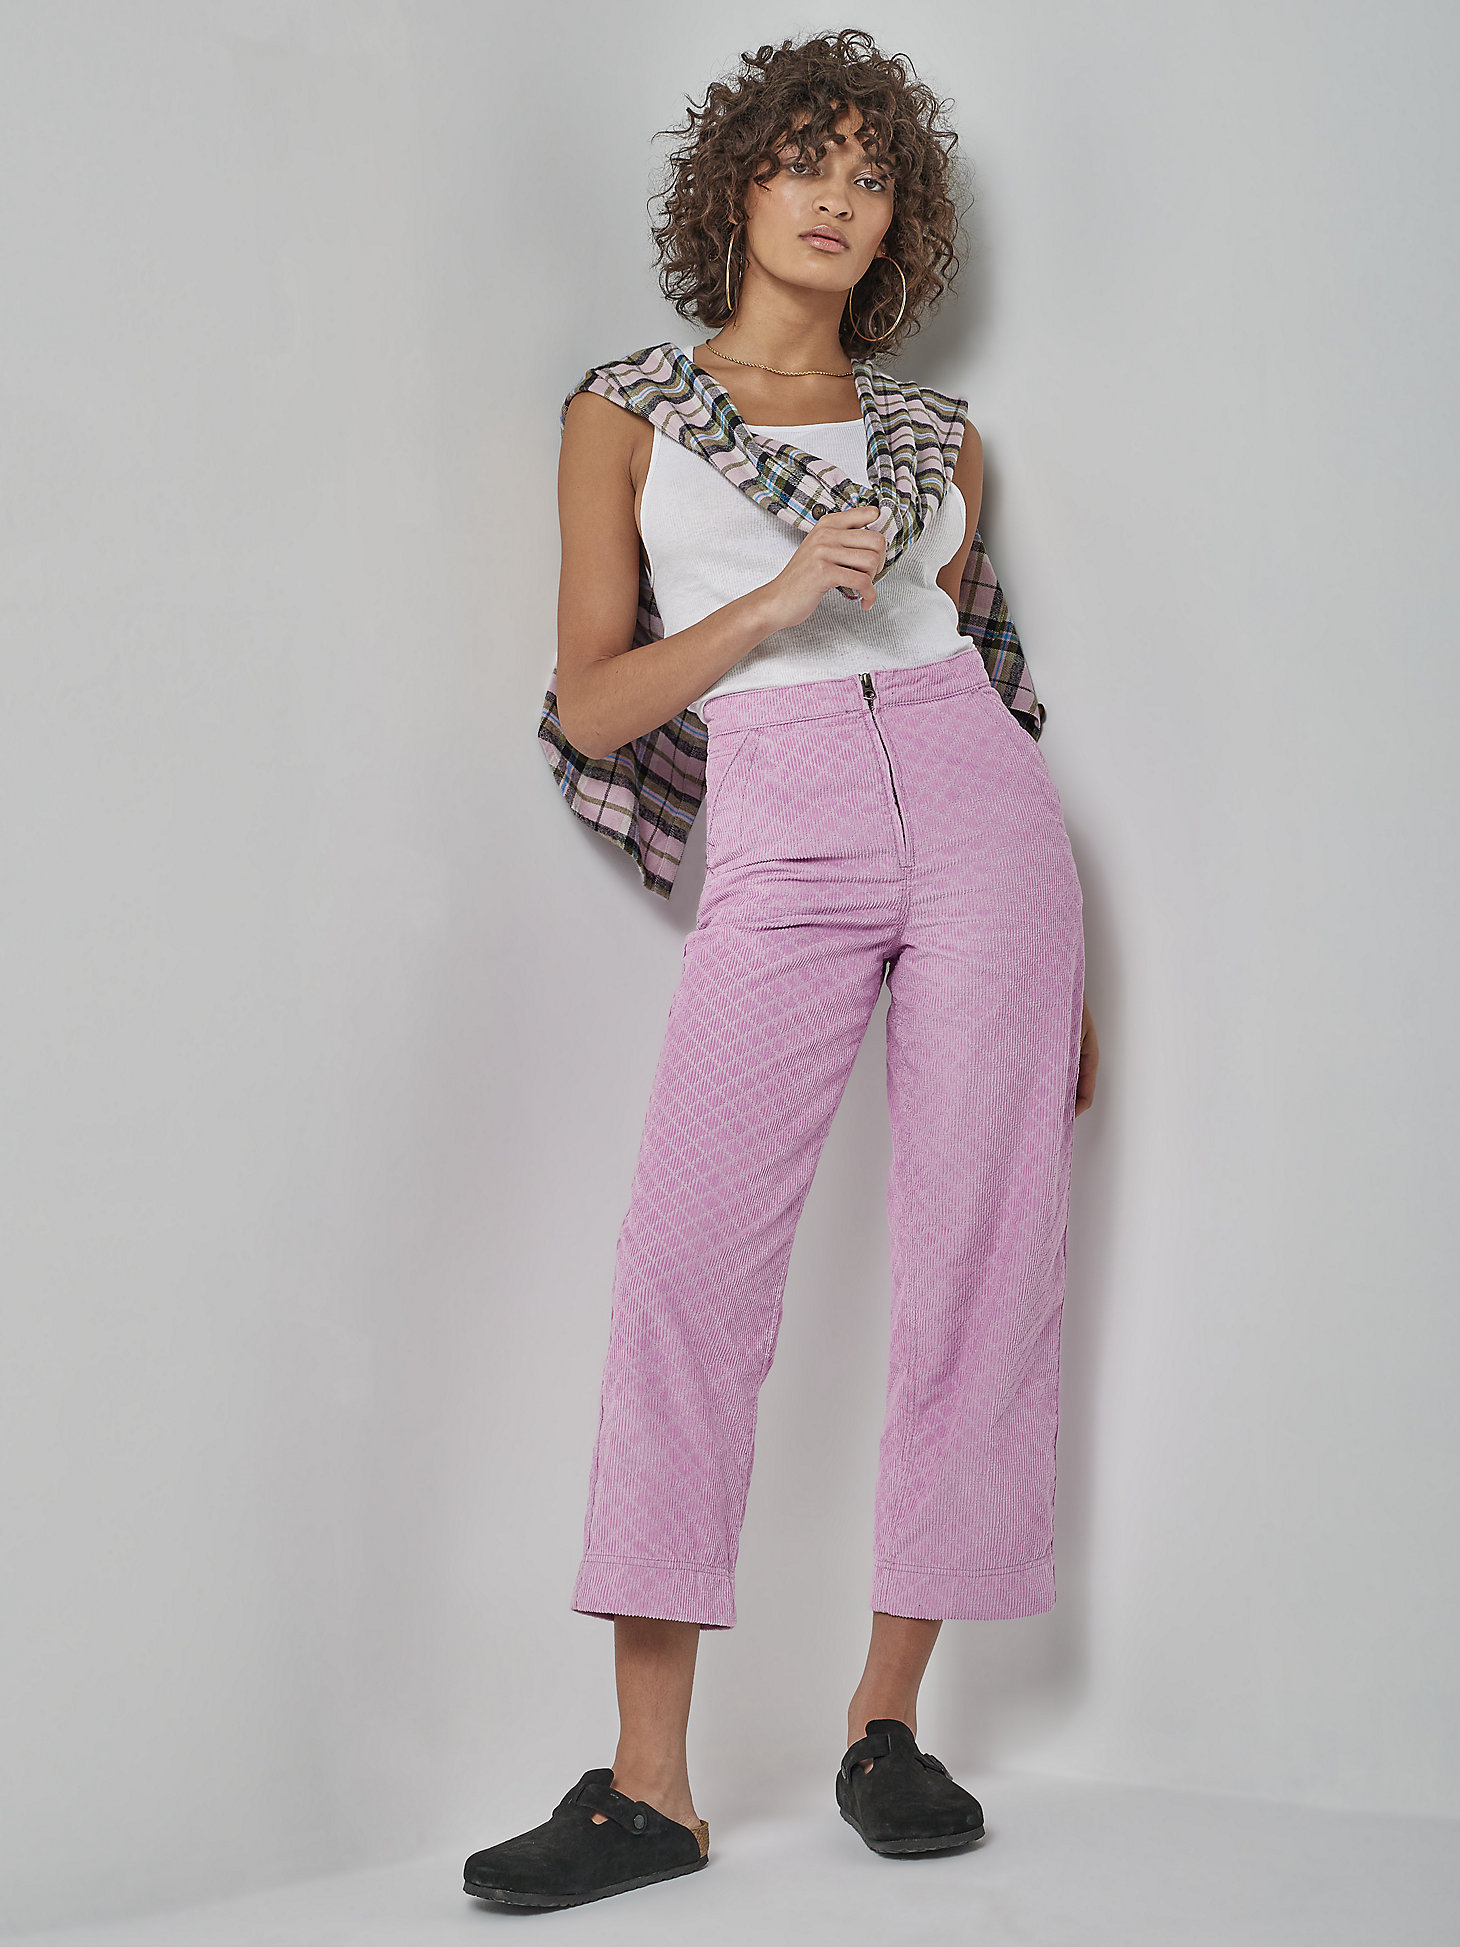 Women's Lee® x The Brooklyn Circus® Whizit Zip Corduroy Pant in Sugar Lilac alternative view 6